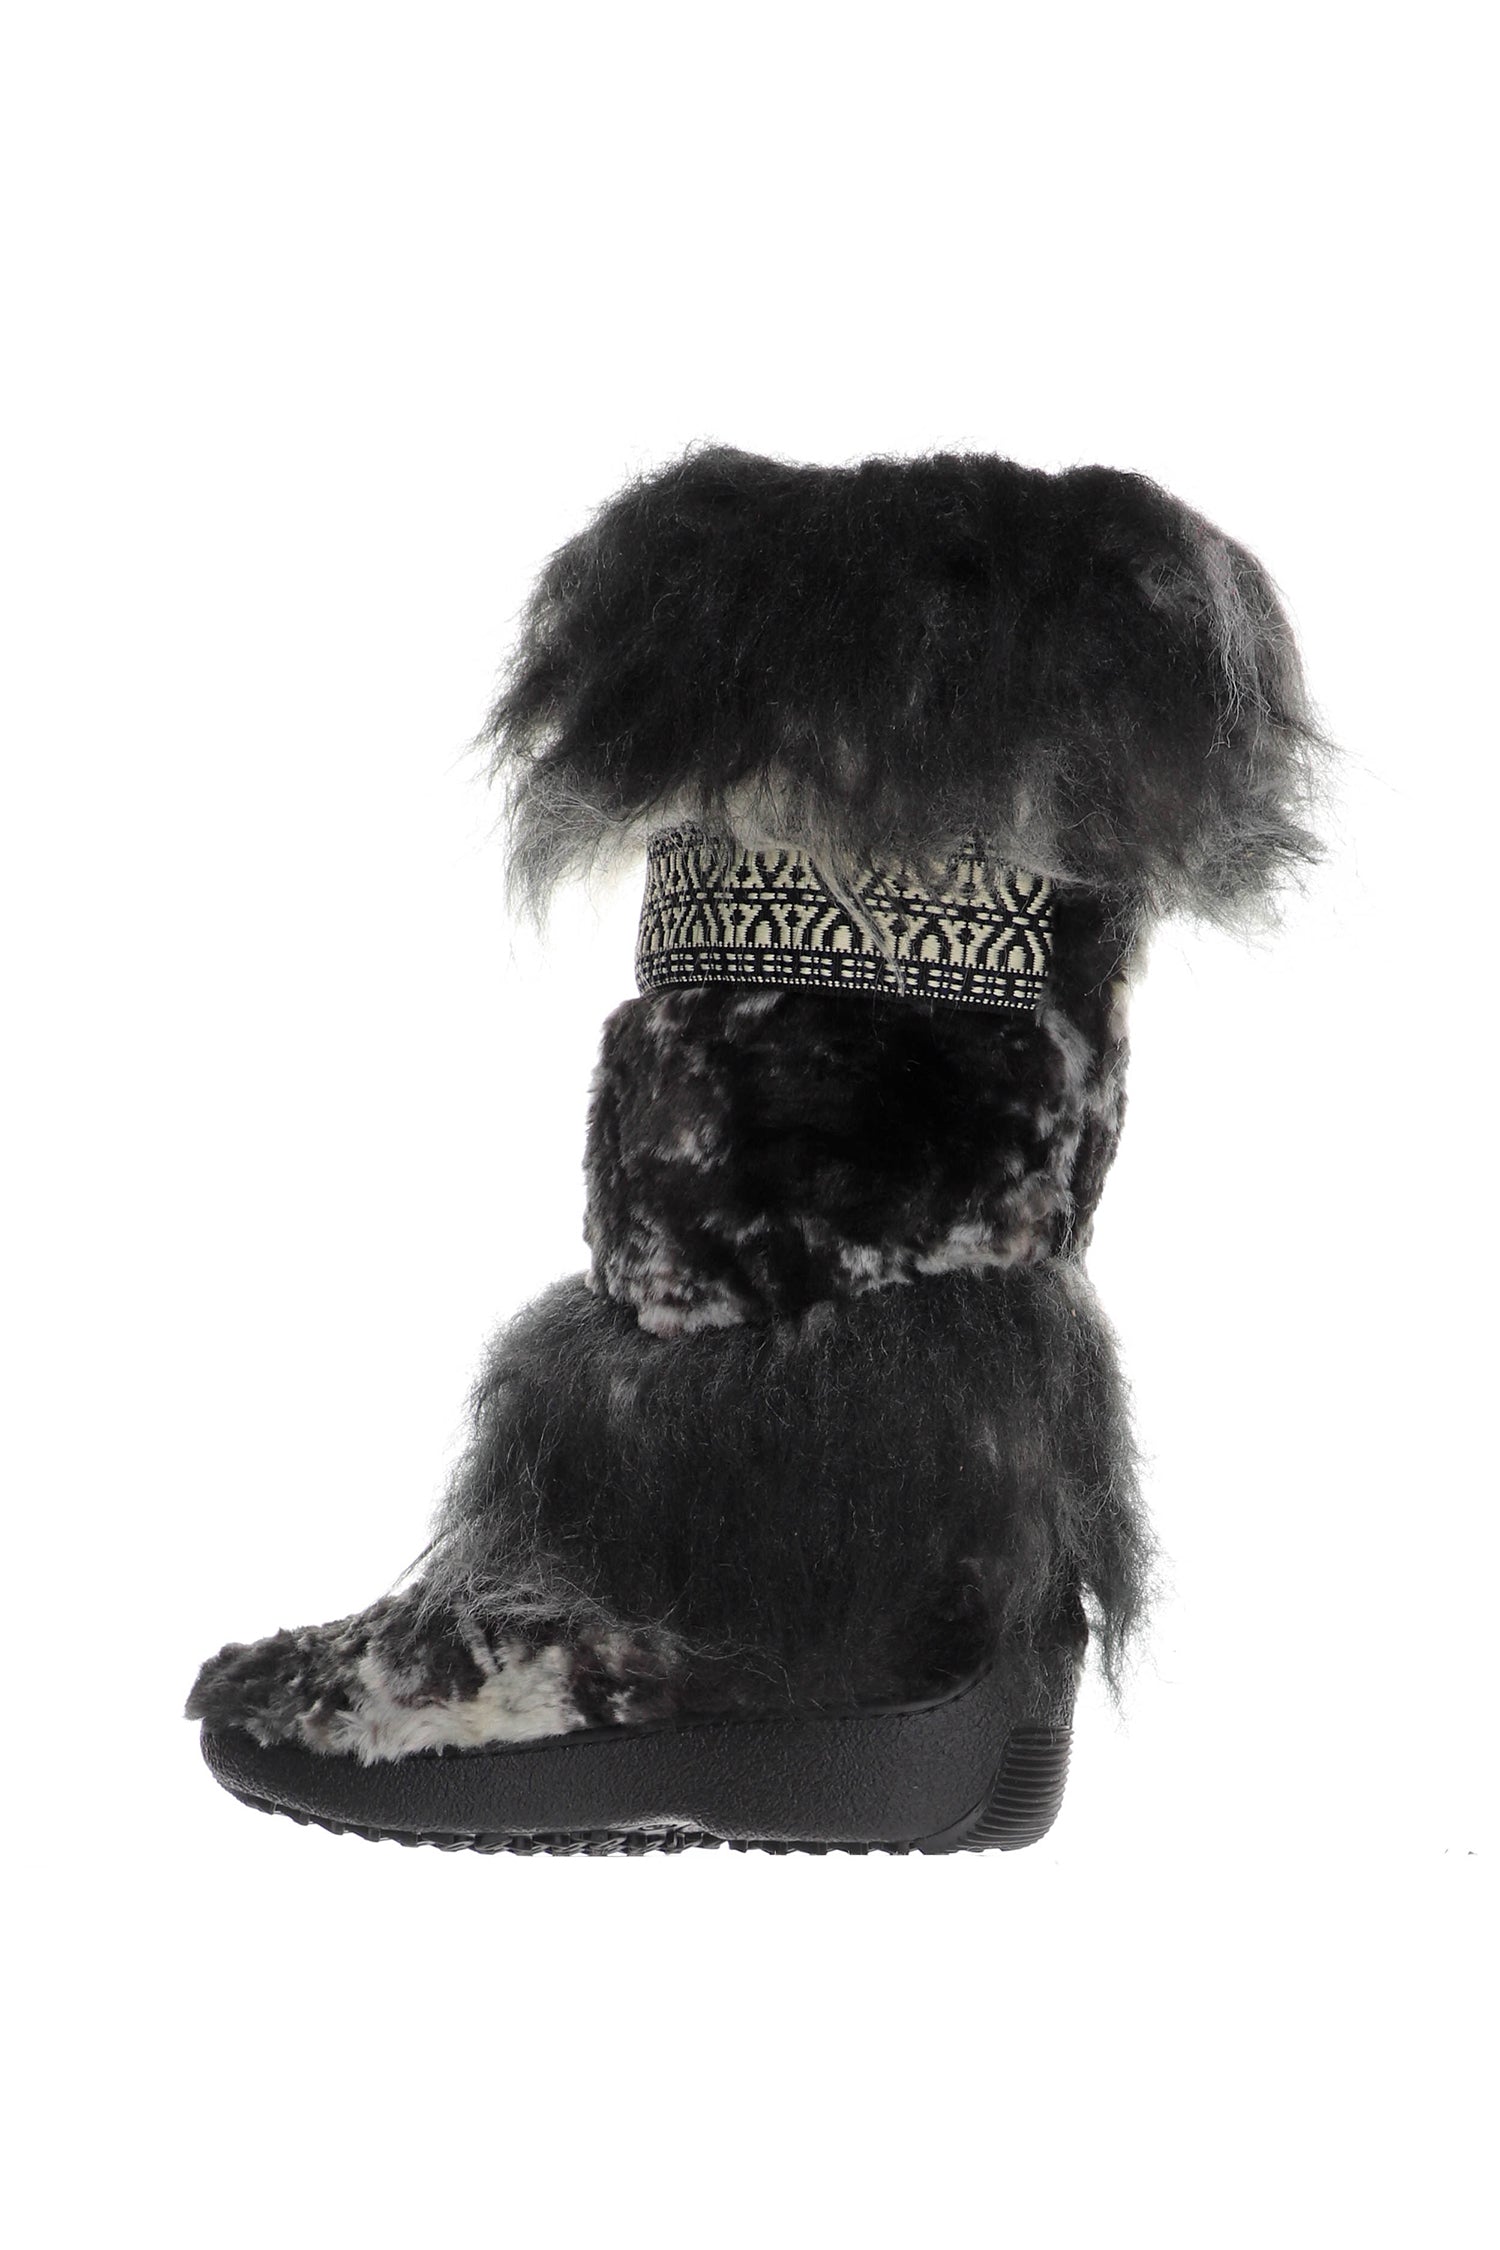 Other side of the Boot, black and grey furry boots, high sole, black lace to tied, long flurry top